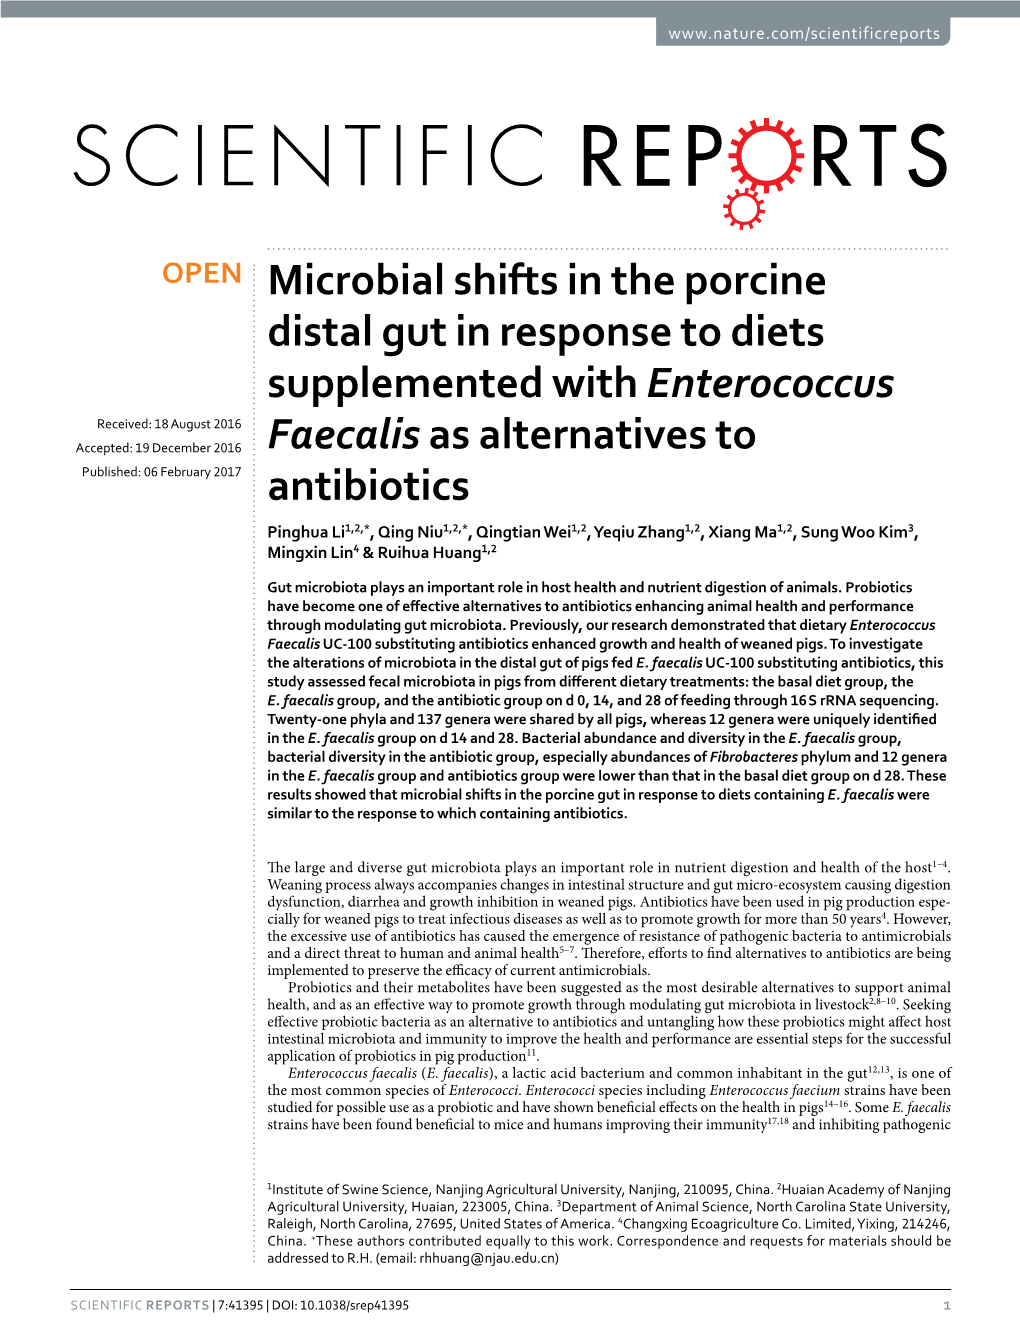 Microbial Shifts in the Porcine Distal Gut in Response to Diets